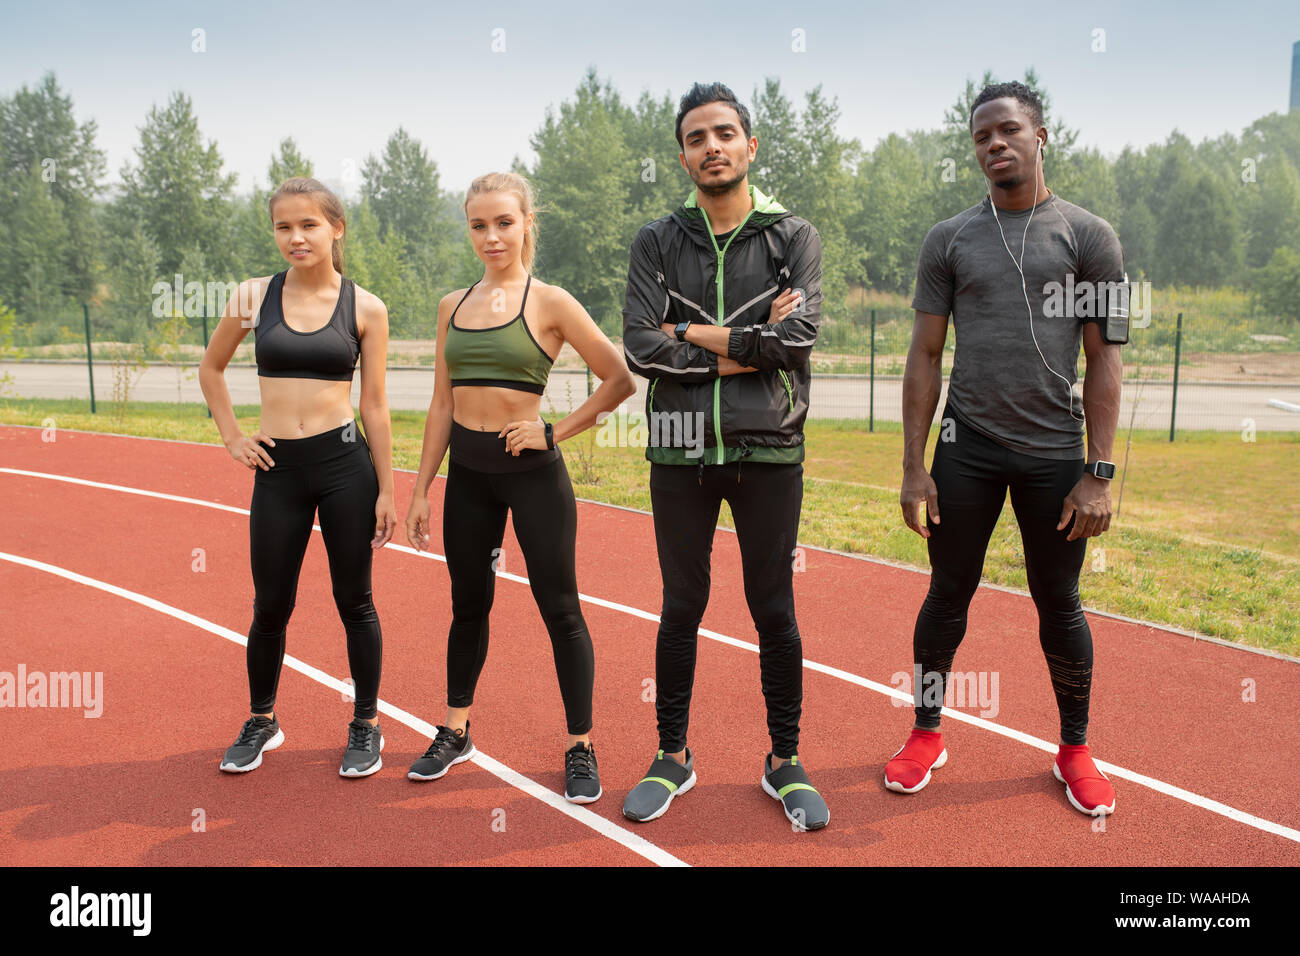 Row of young intercultural athletes in sportswear standing on racetracks Stock Photo